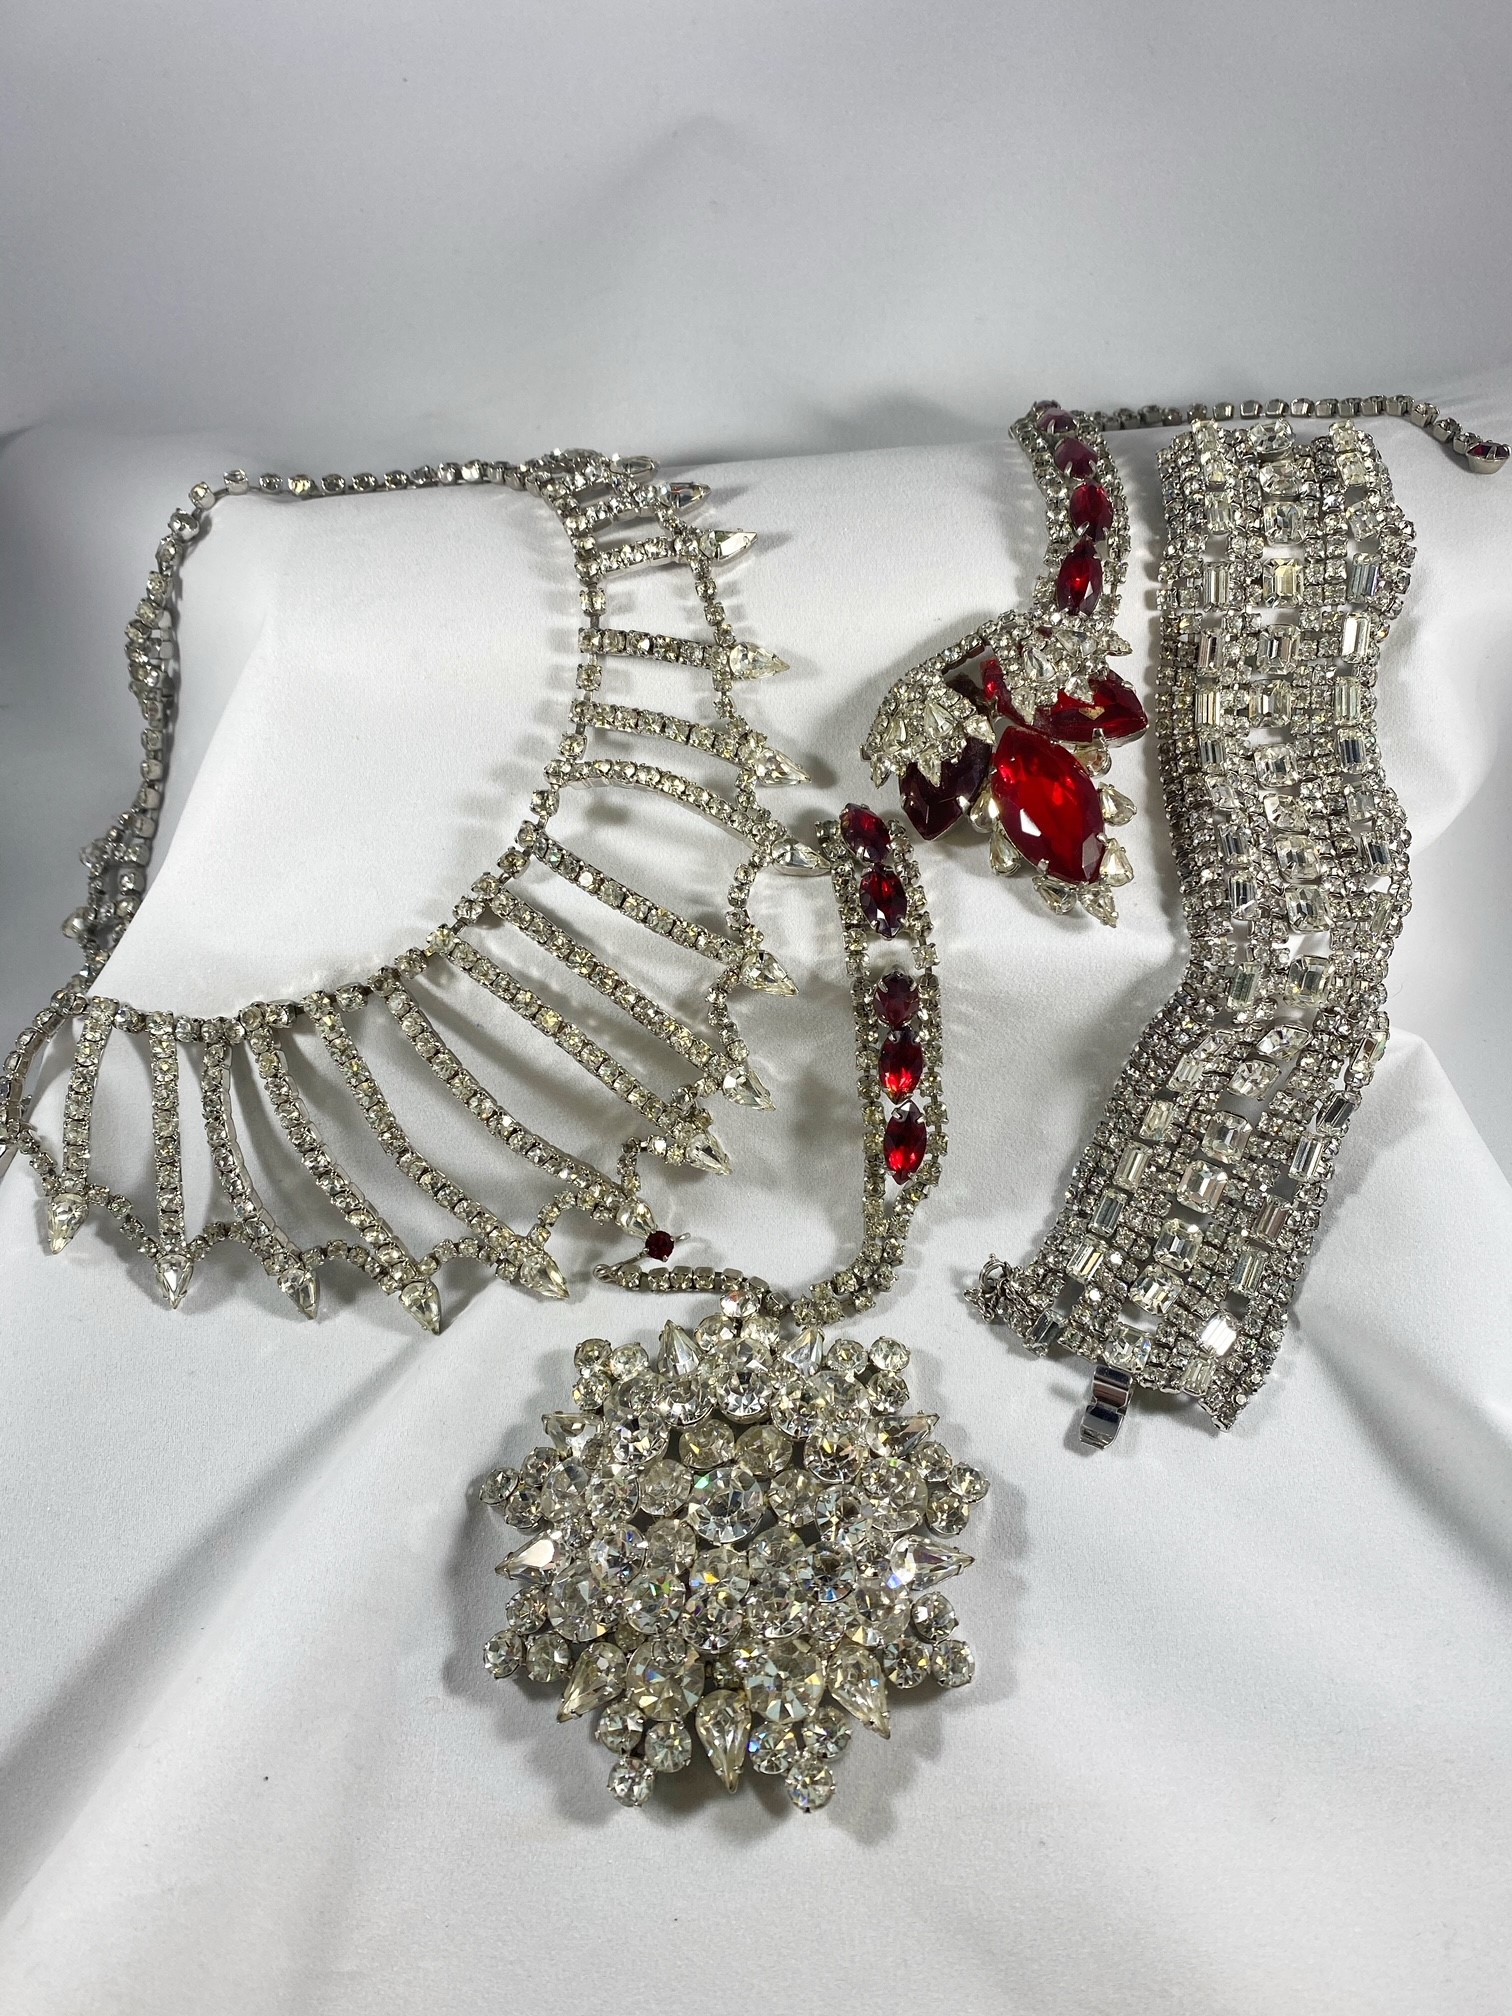 Lot 1079: Silver Colored with Clear Stones Matching Bracelet Matching Brooch Silver Colored with Red & Clear Stones (broken)